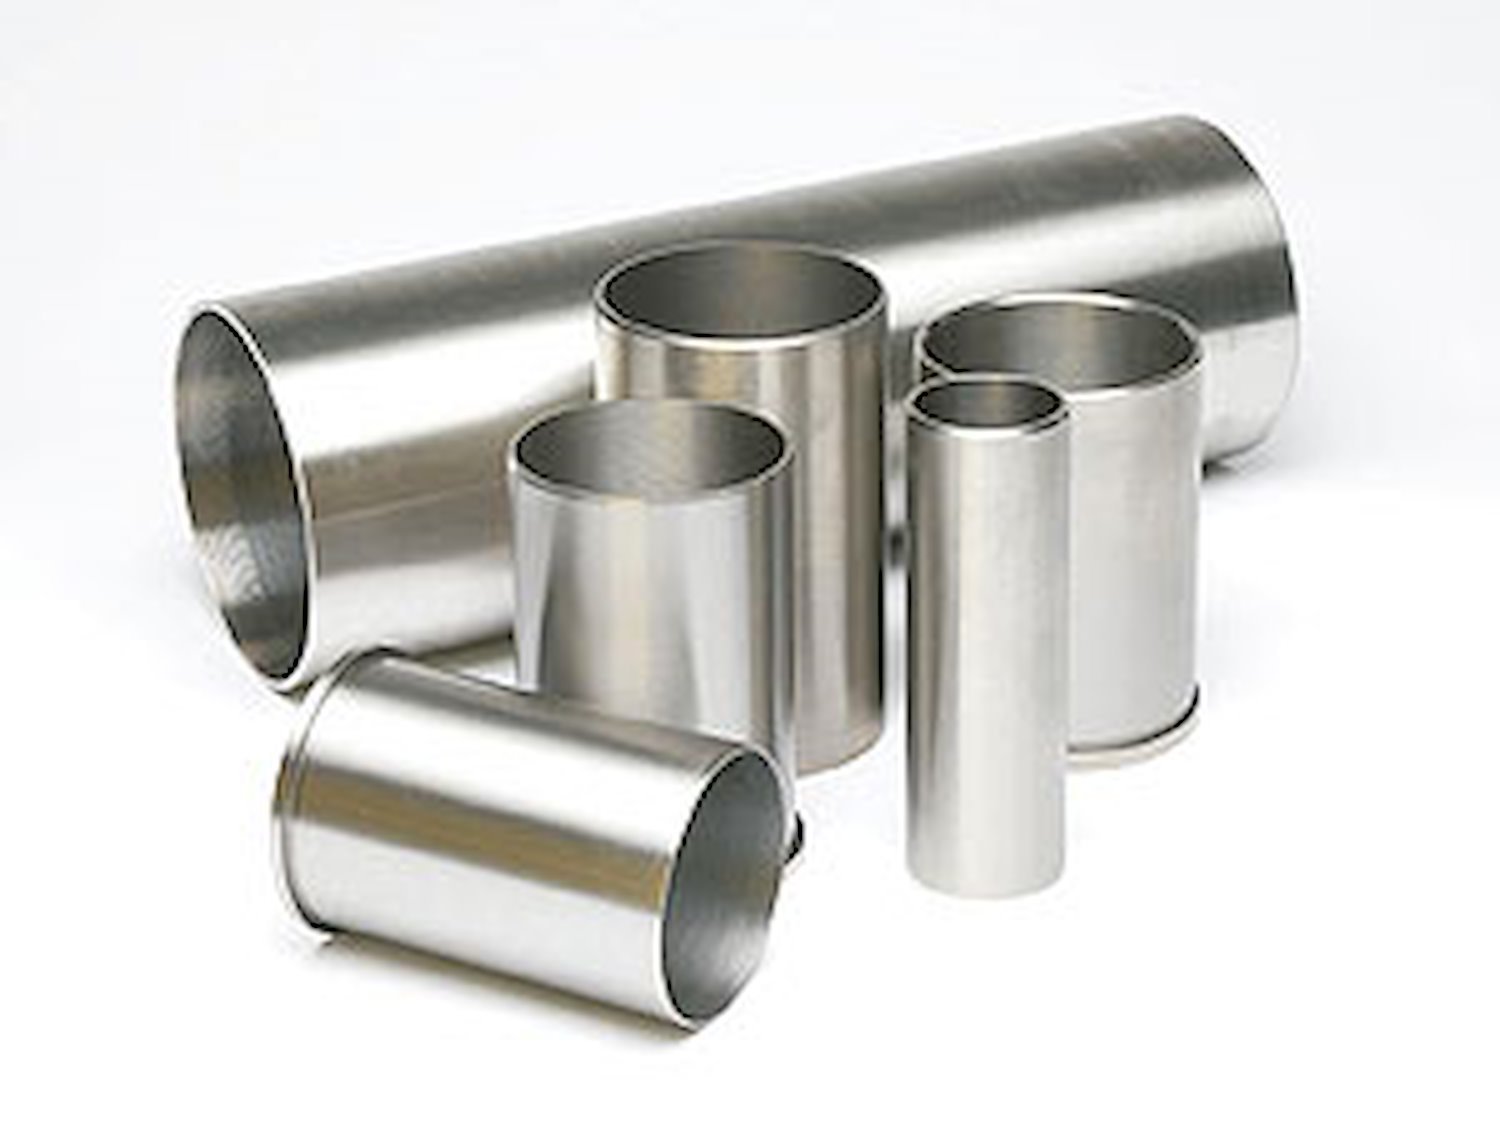 Cylinder Sleeve Bore: 2.8740" Length: 6-1/16" Wall Thickness: 1/8"